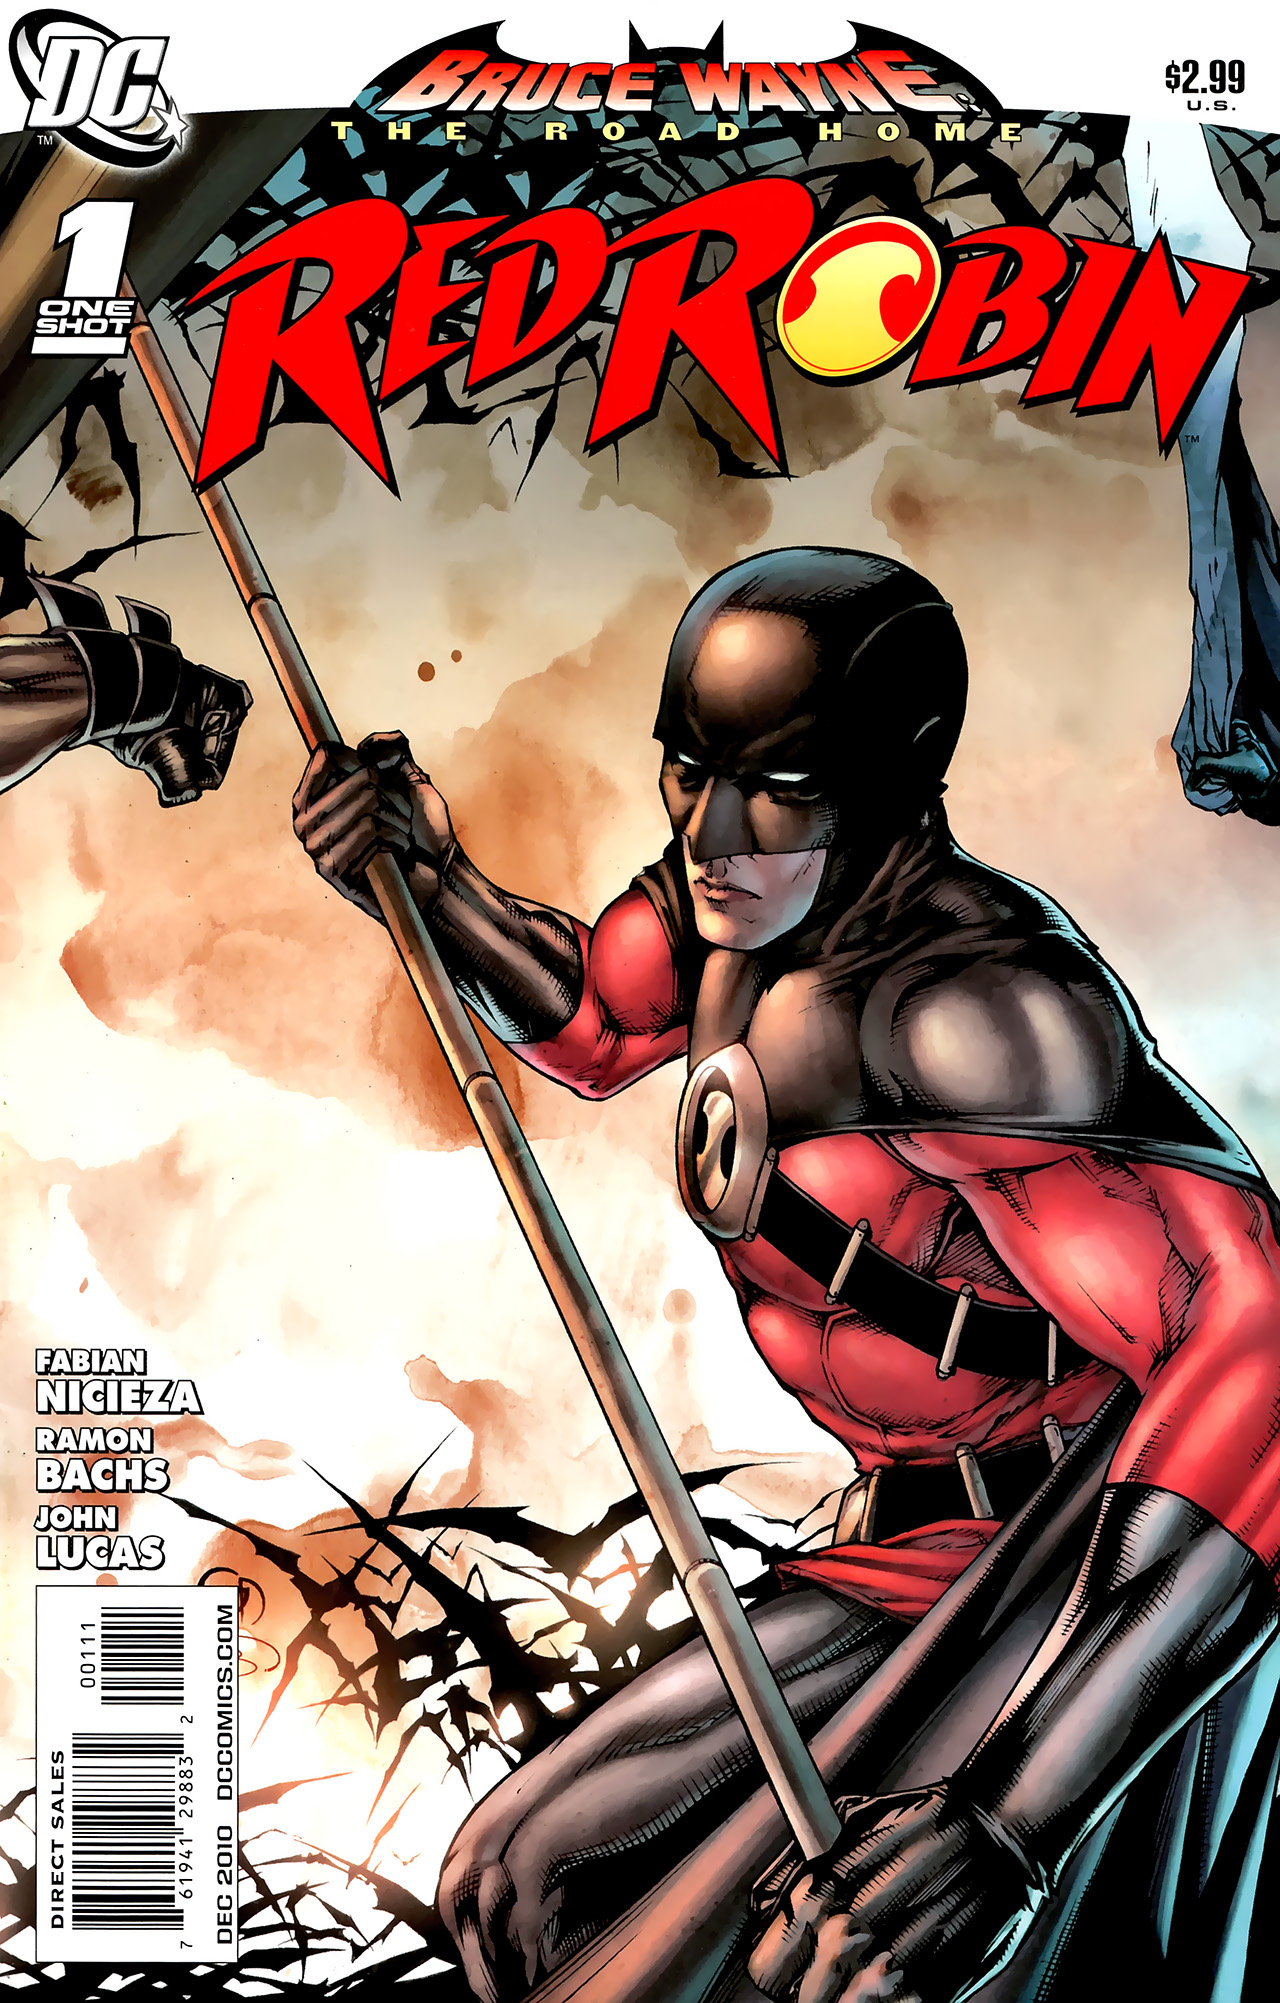 Read online Bruce Wayne: The Road Home comic -  Issue # Issue Red Robin - 1